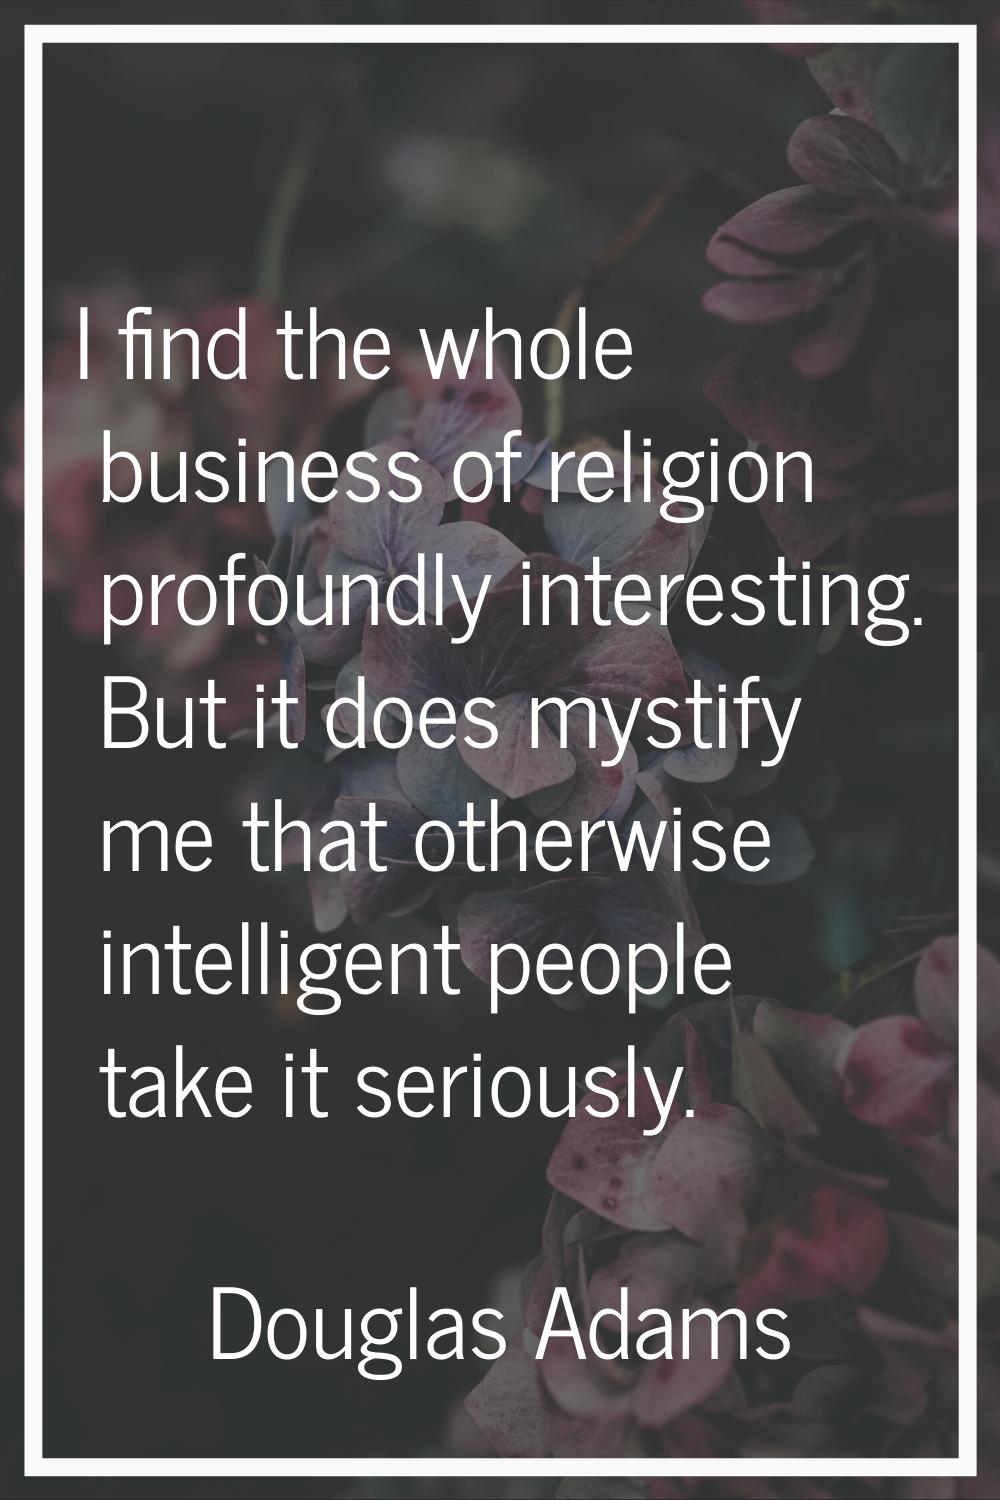 I find the whole business of religion profoundly interesting. But it does mystify me that otherwise